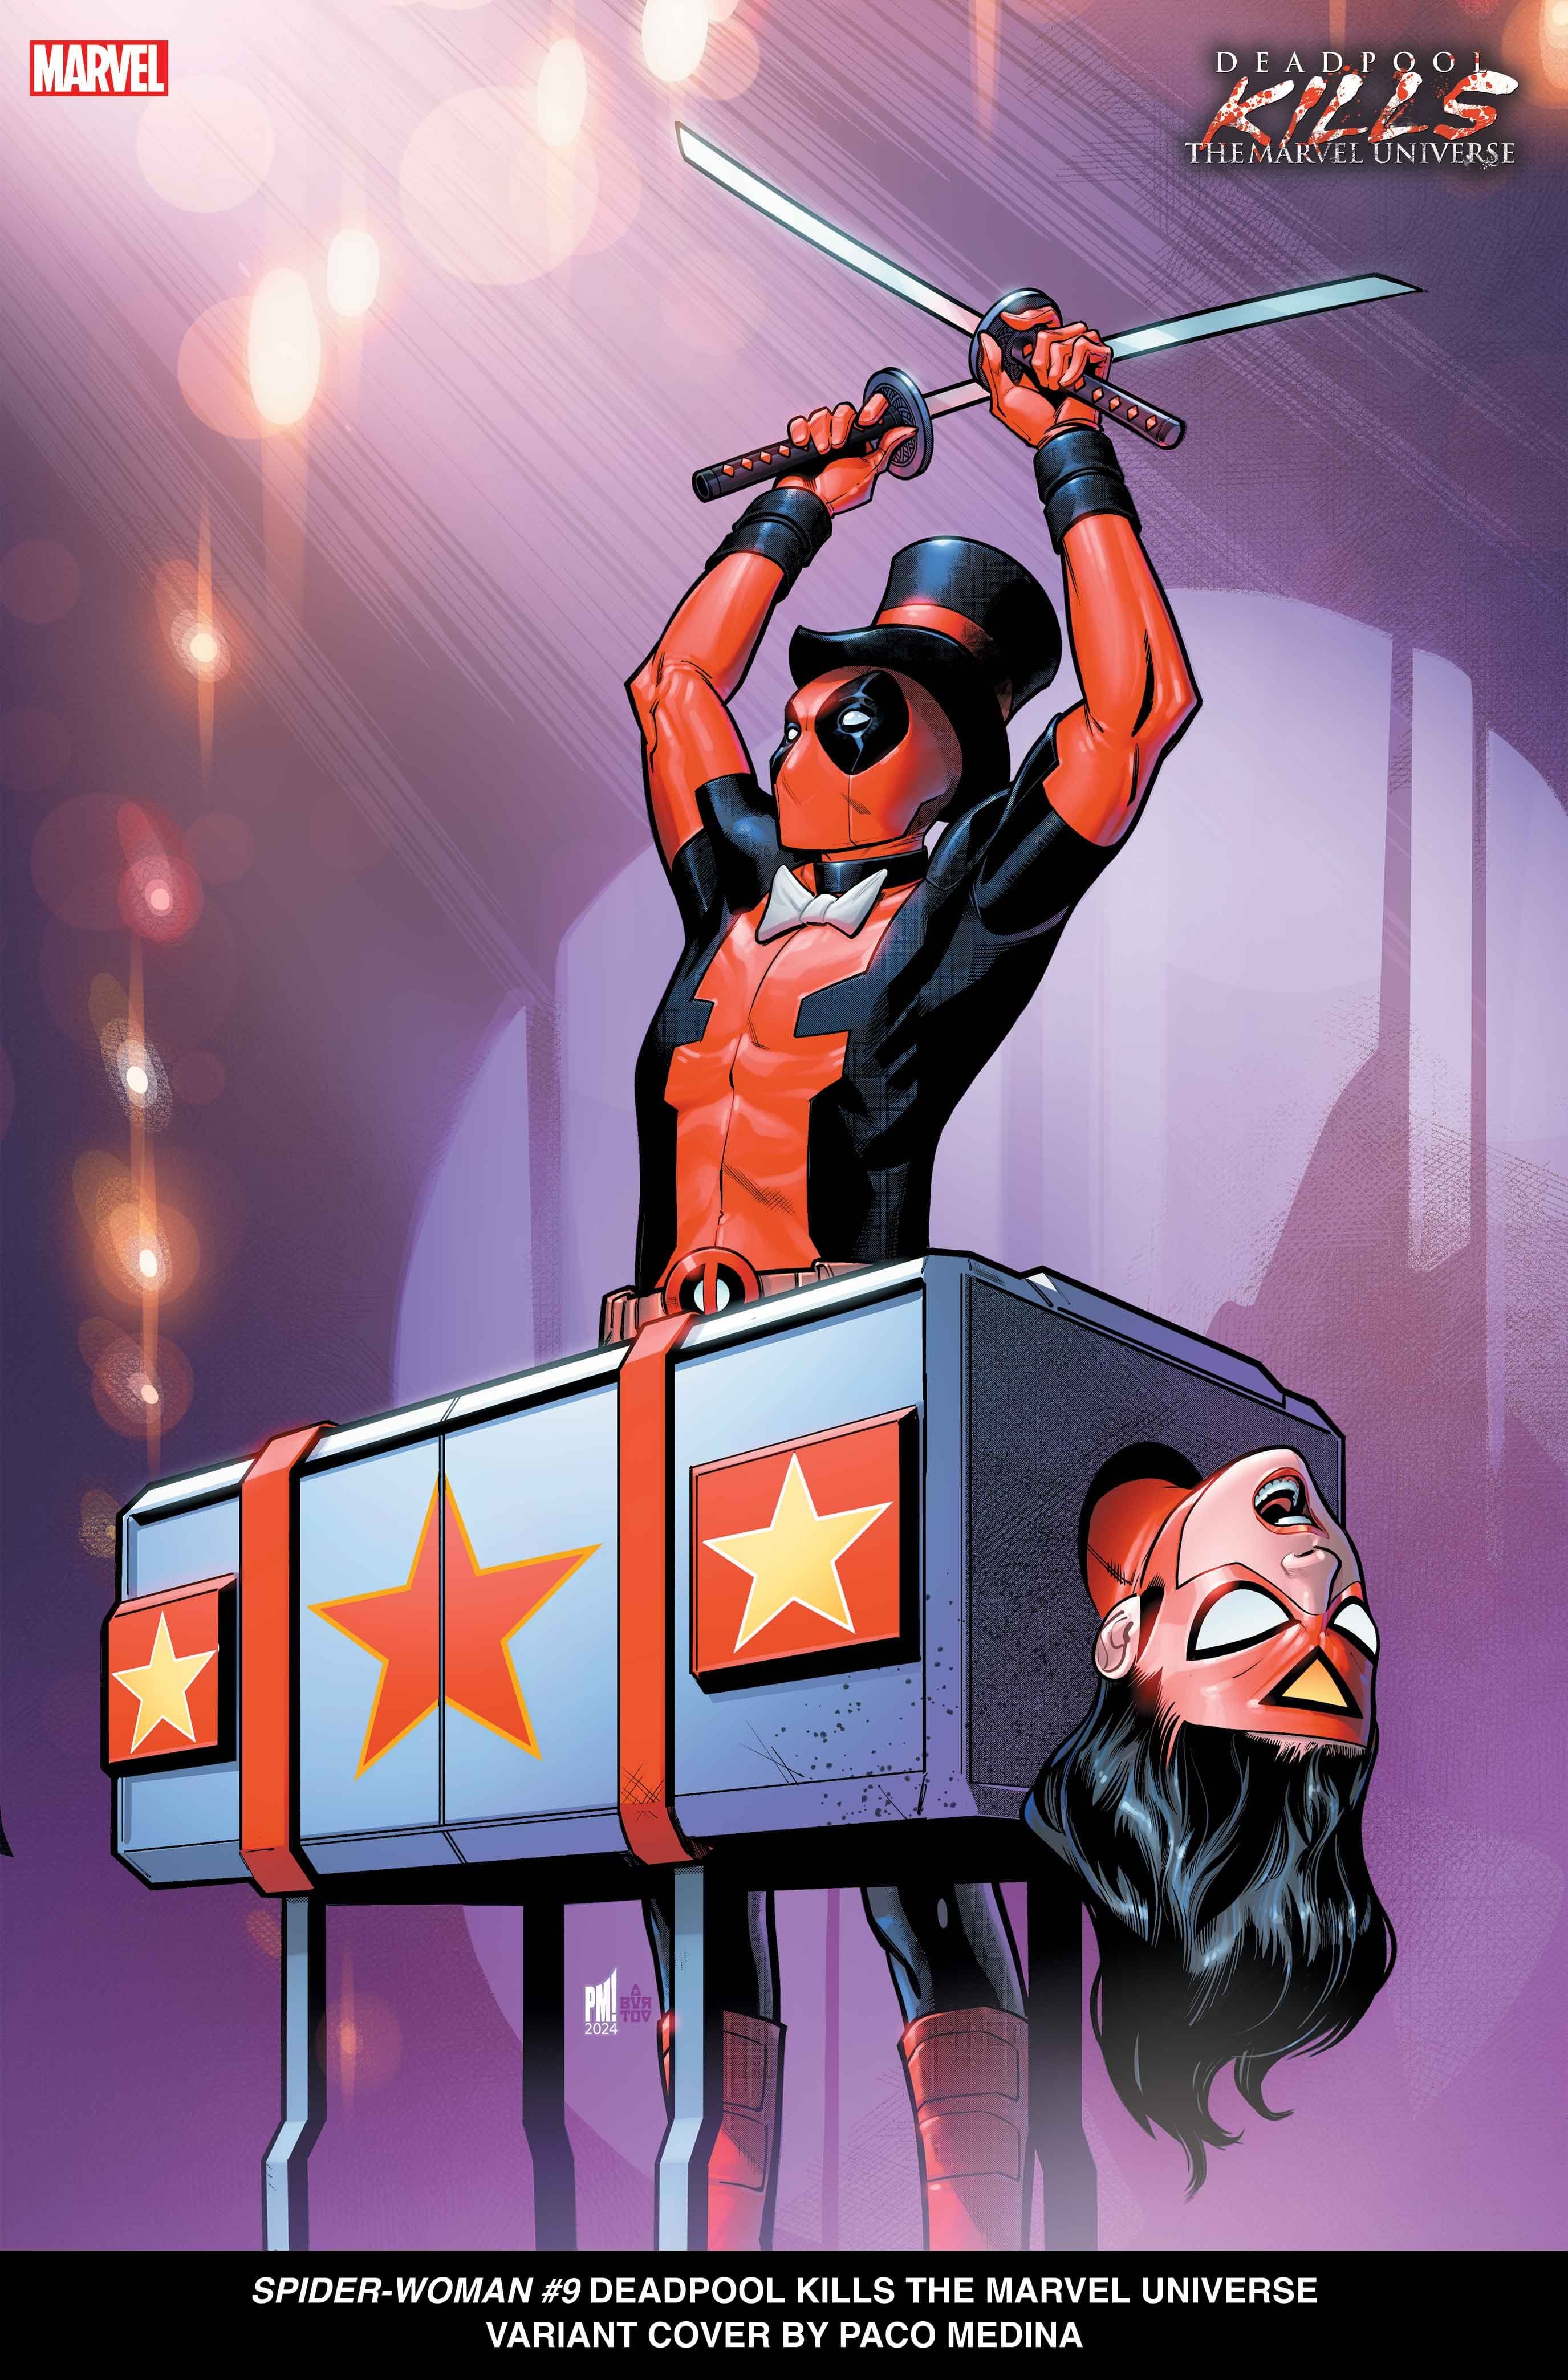 SPIDER-WOMAN #9 Deadpool Kills the Marvel Universe Variant Cover by Paco Medina